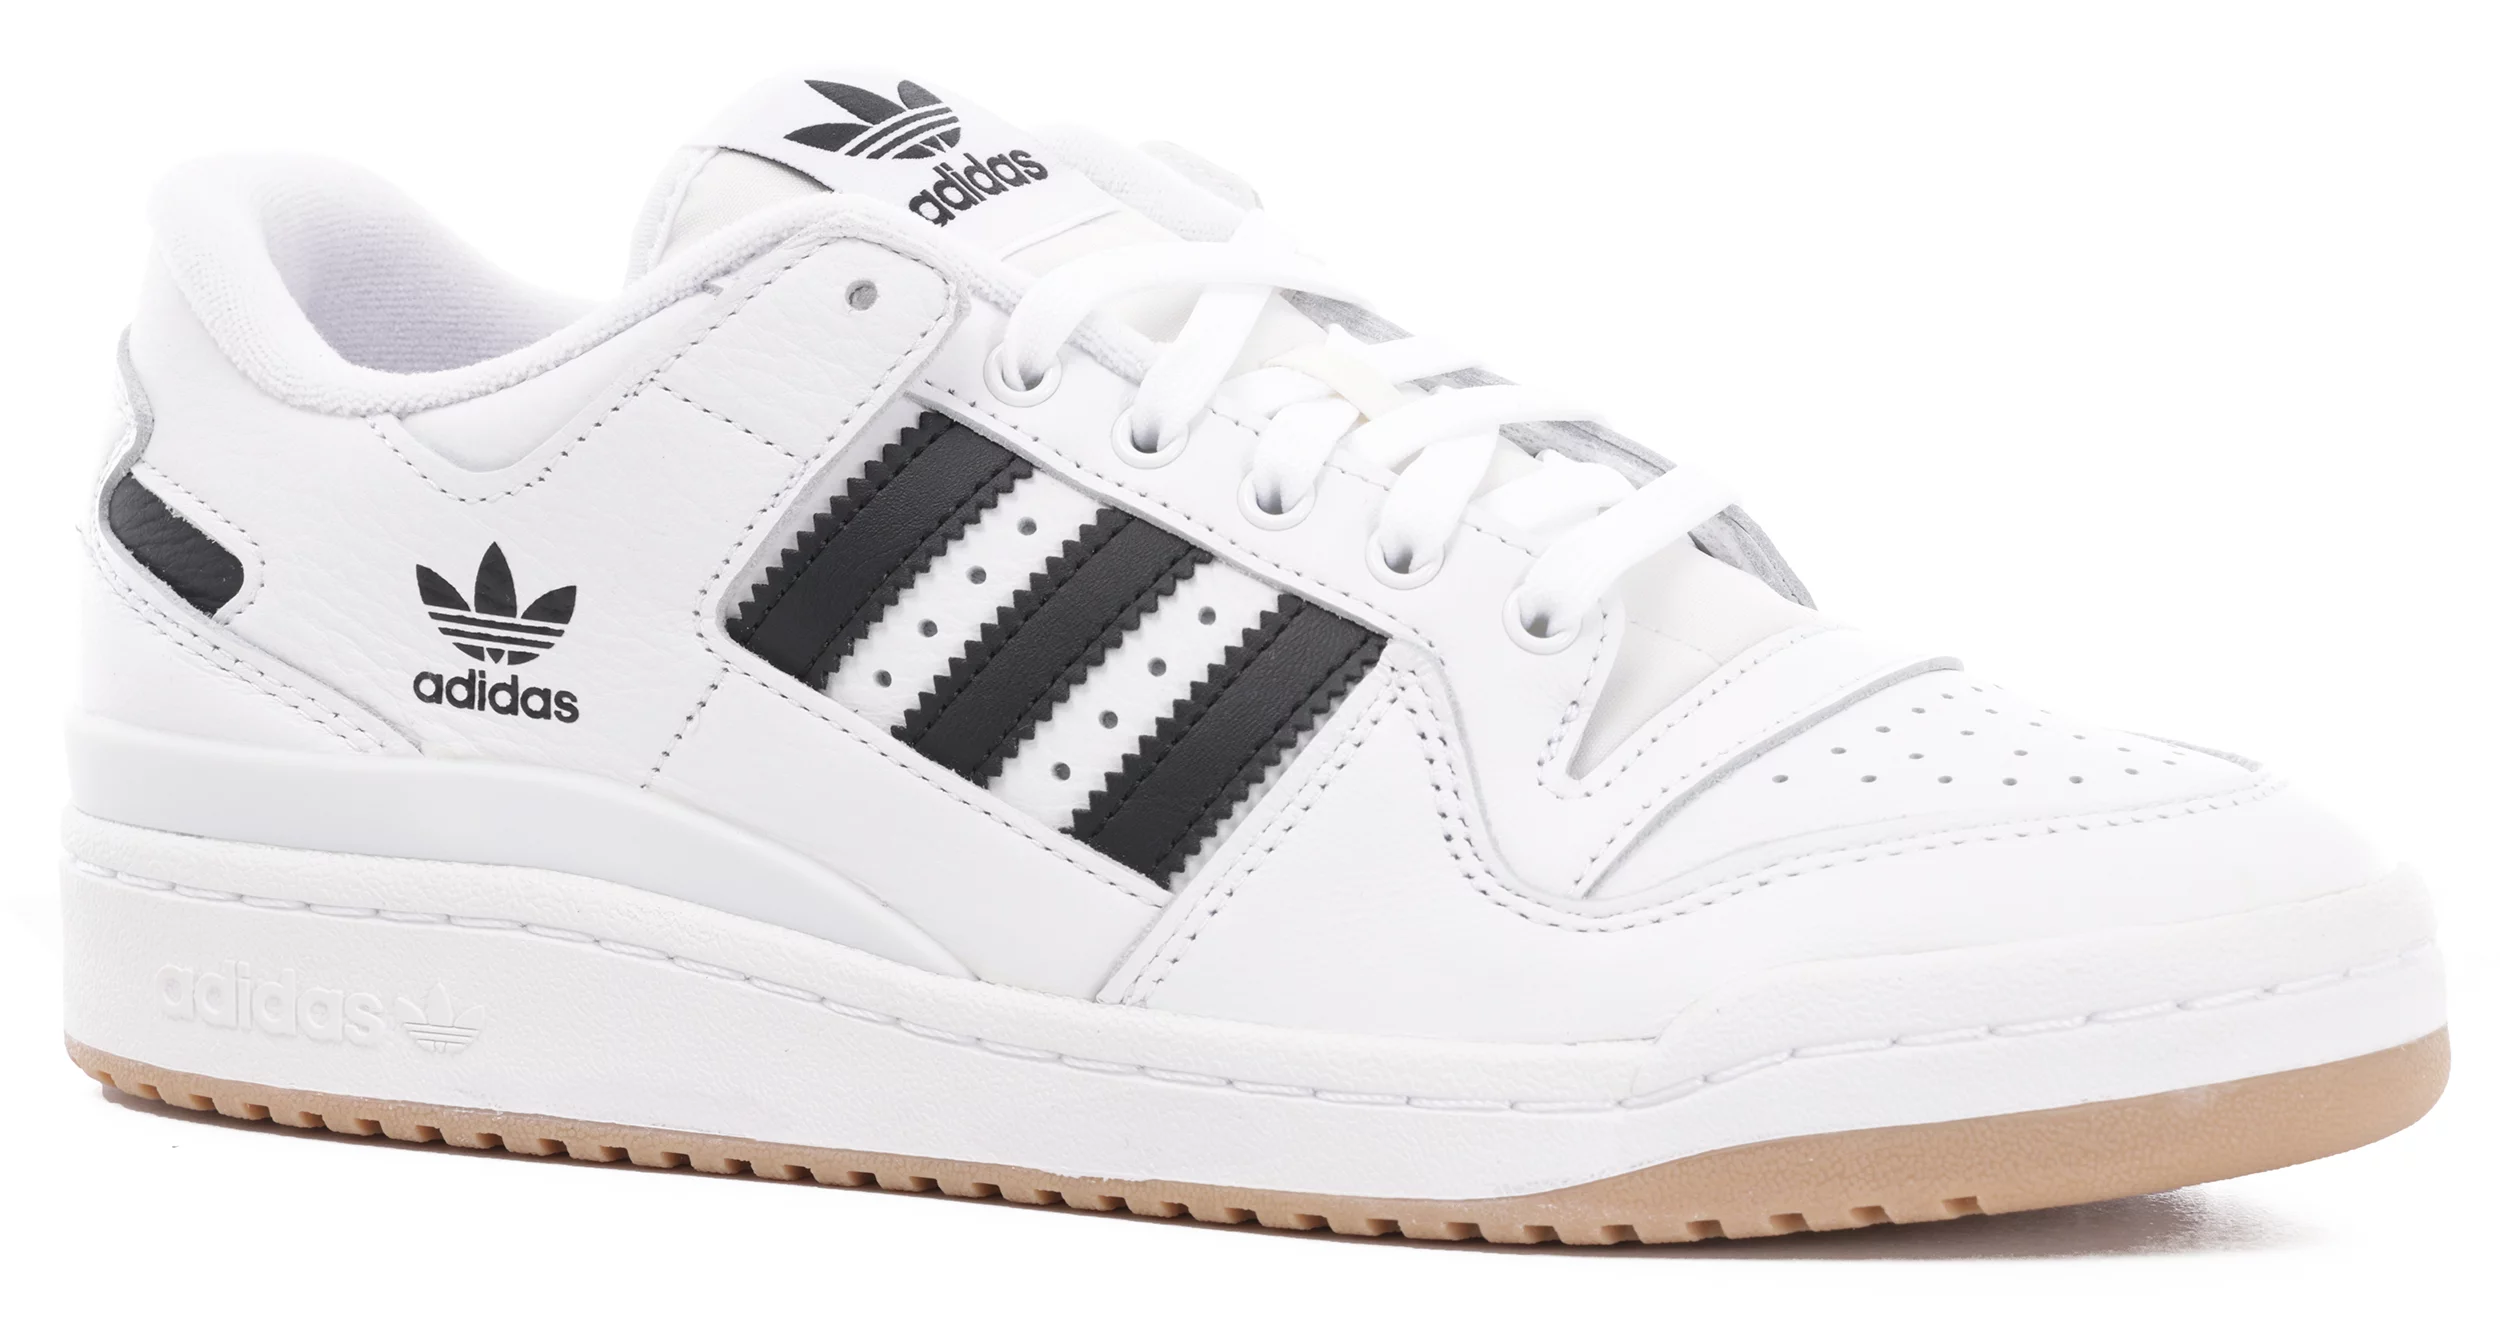 Adidas 84 Low Skate Shoes - footwear white/core white - Free | Tactics